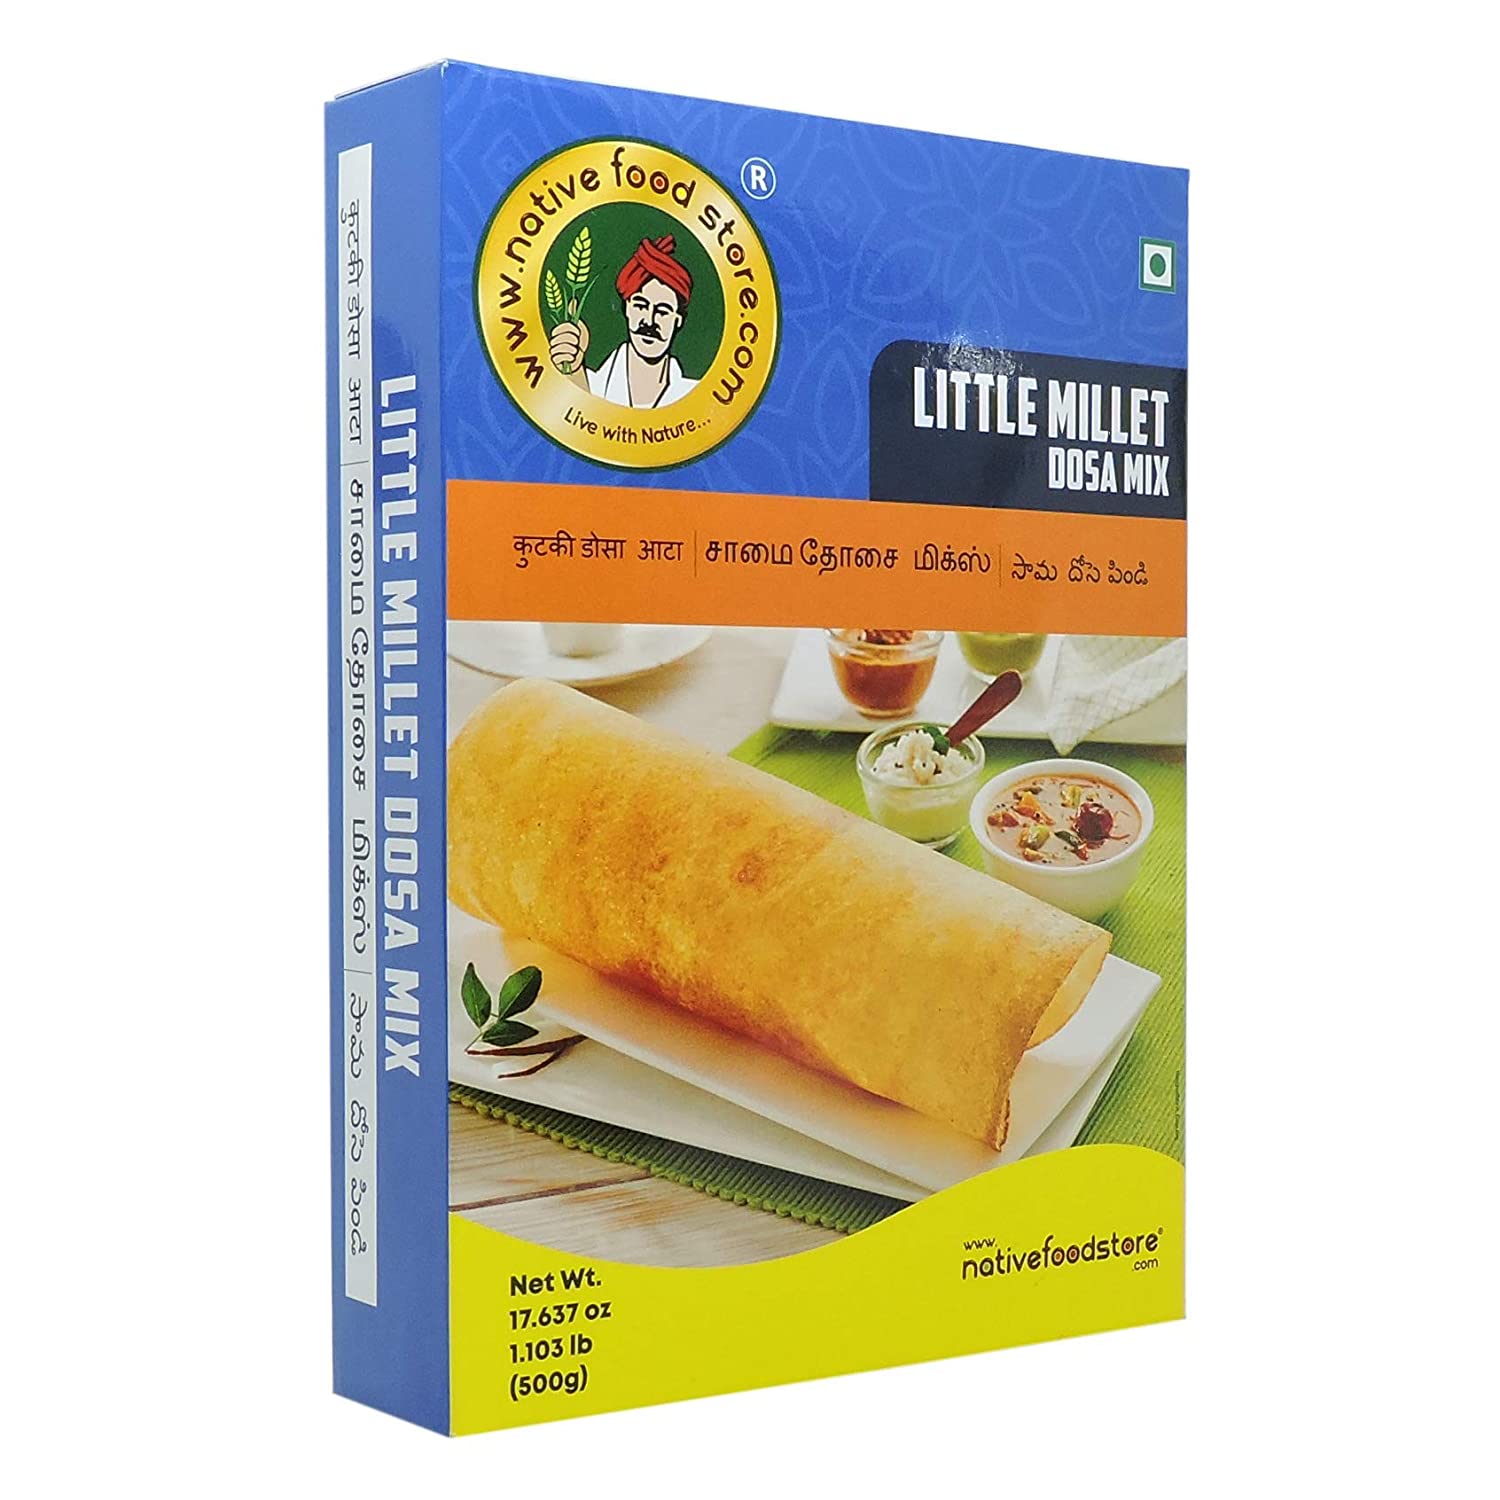 Native Food Store Little Millet Dosa Mix 500 g